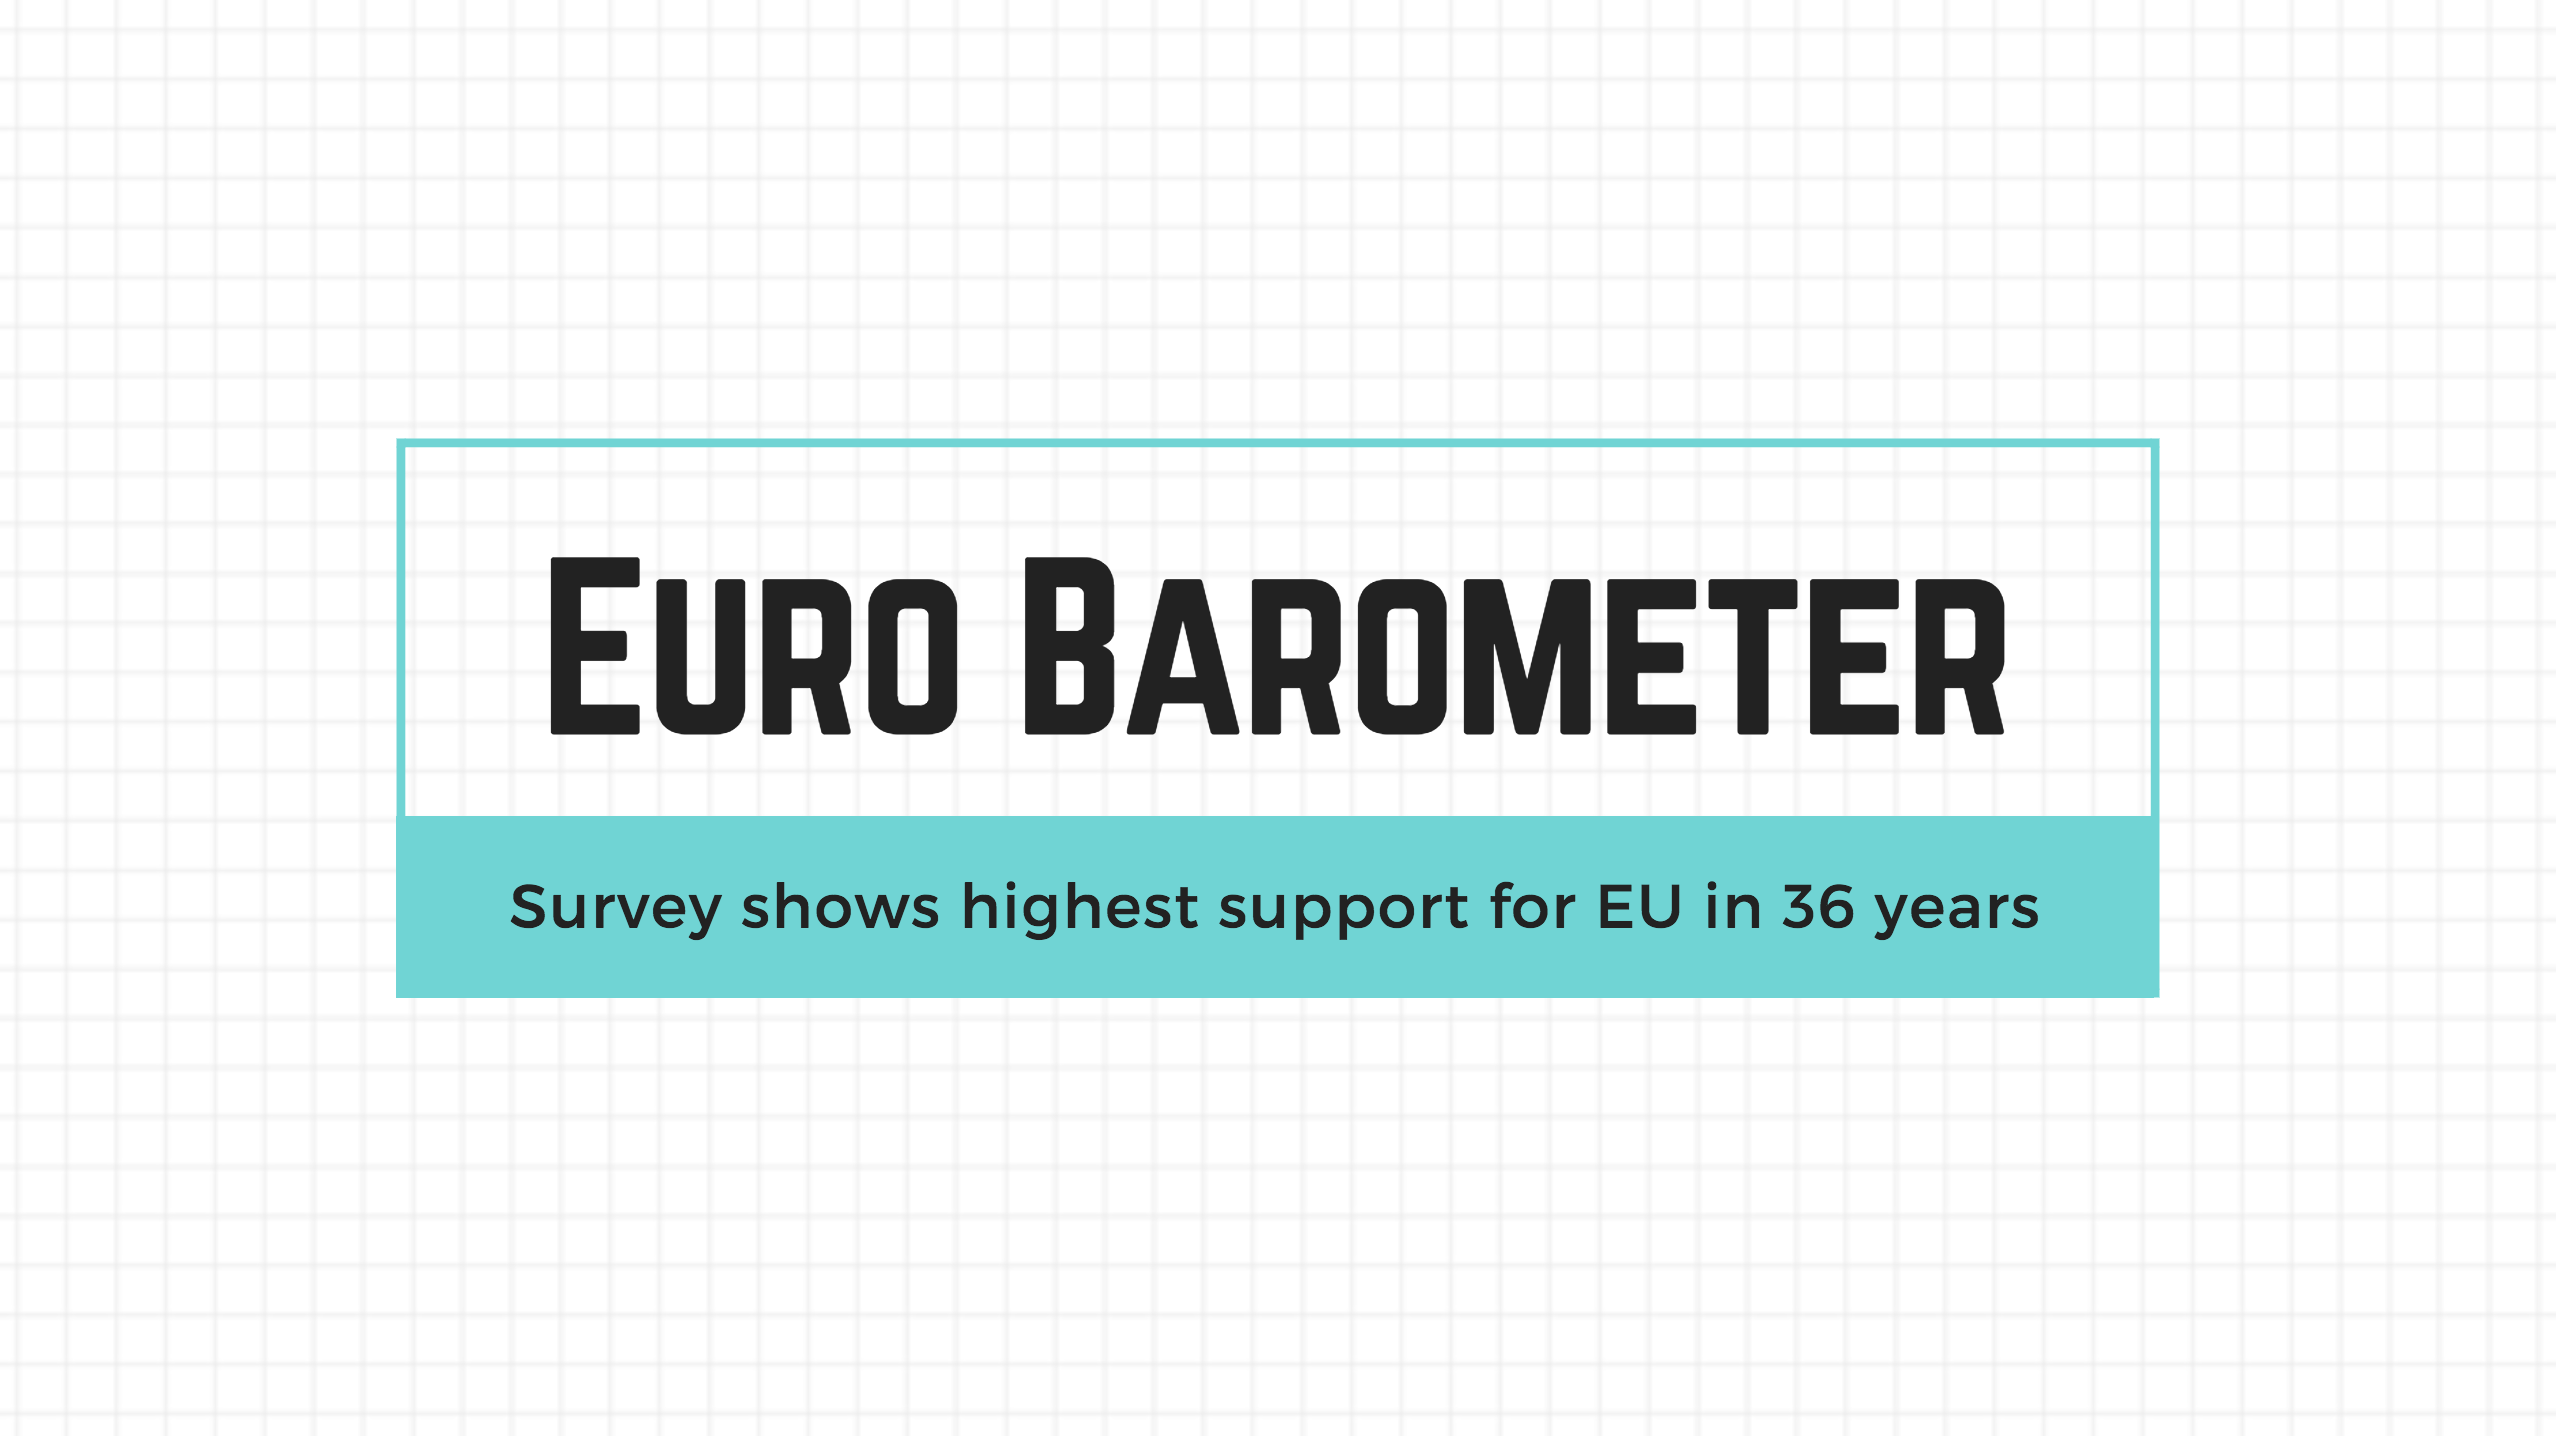 Euro barometer survey shows highest support for the EU in 35 years